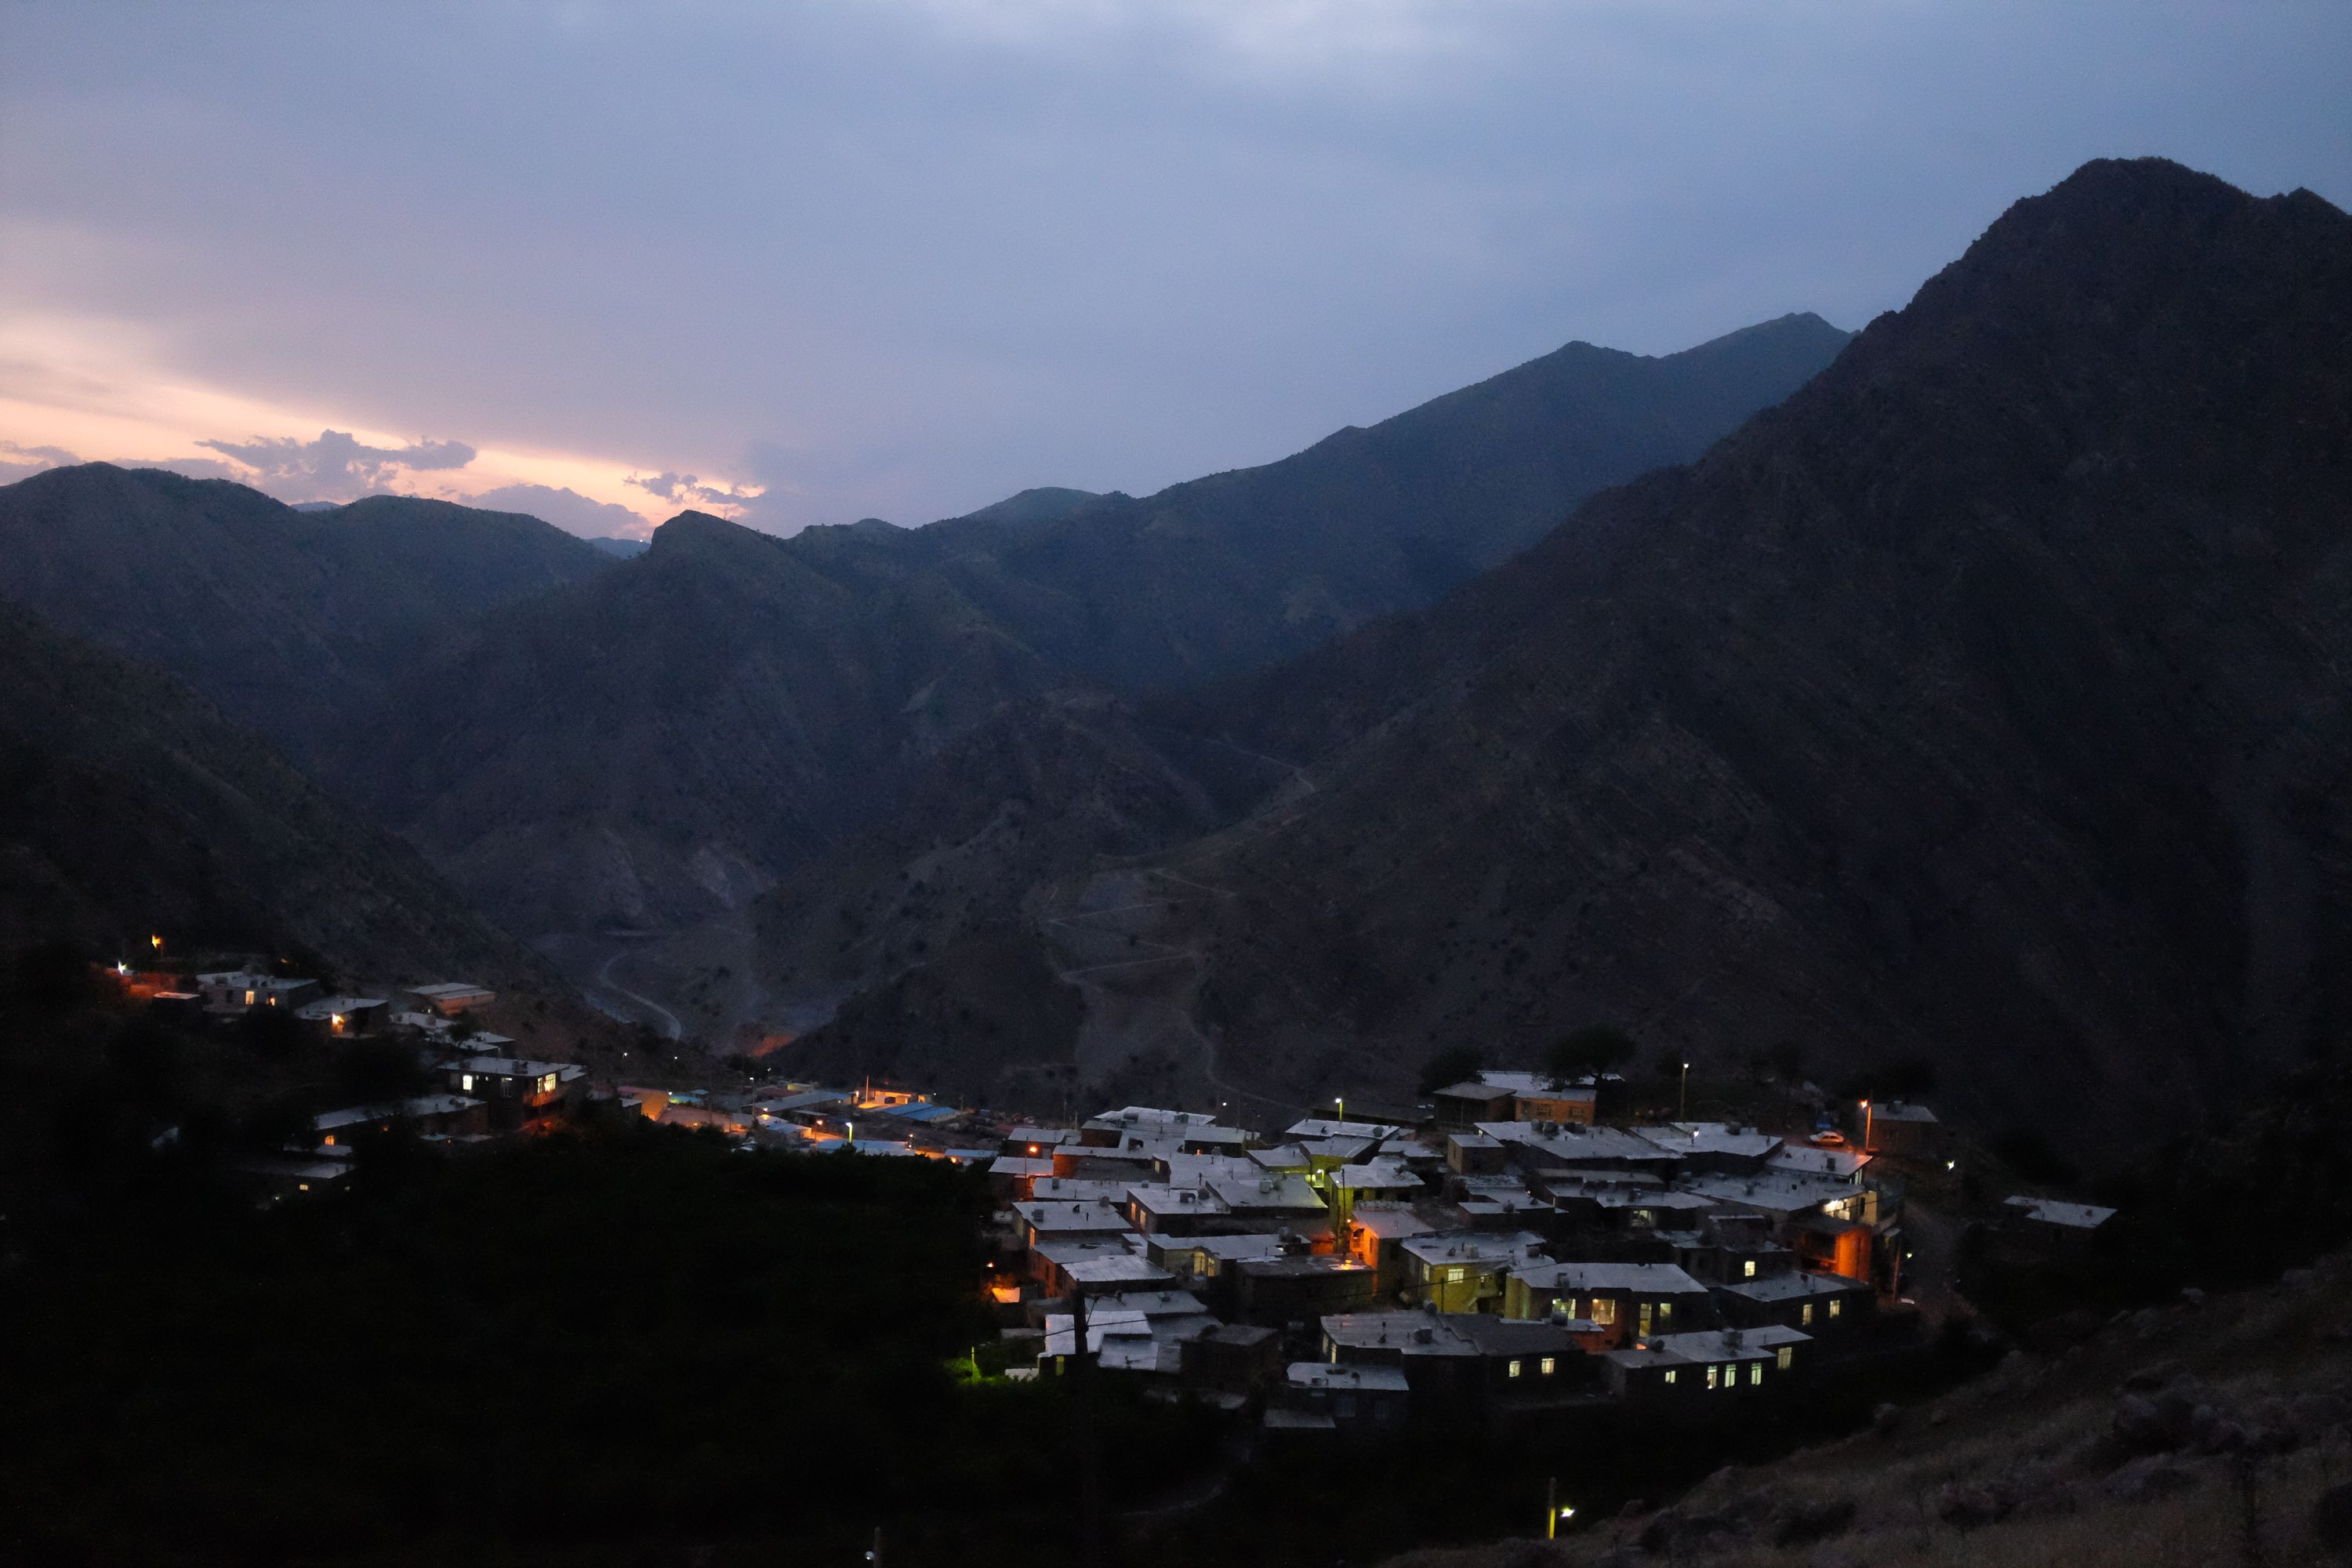 A small village in the mountains at dusk.